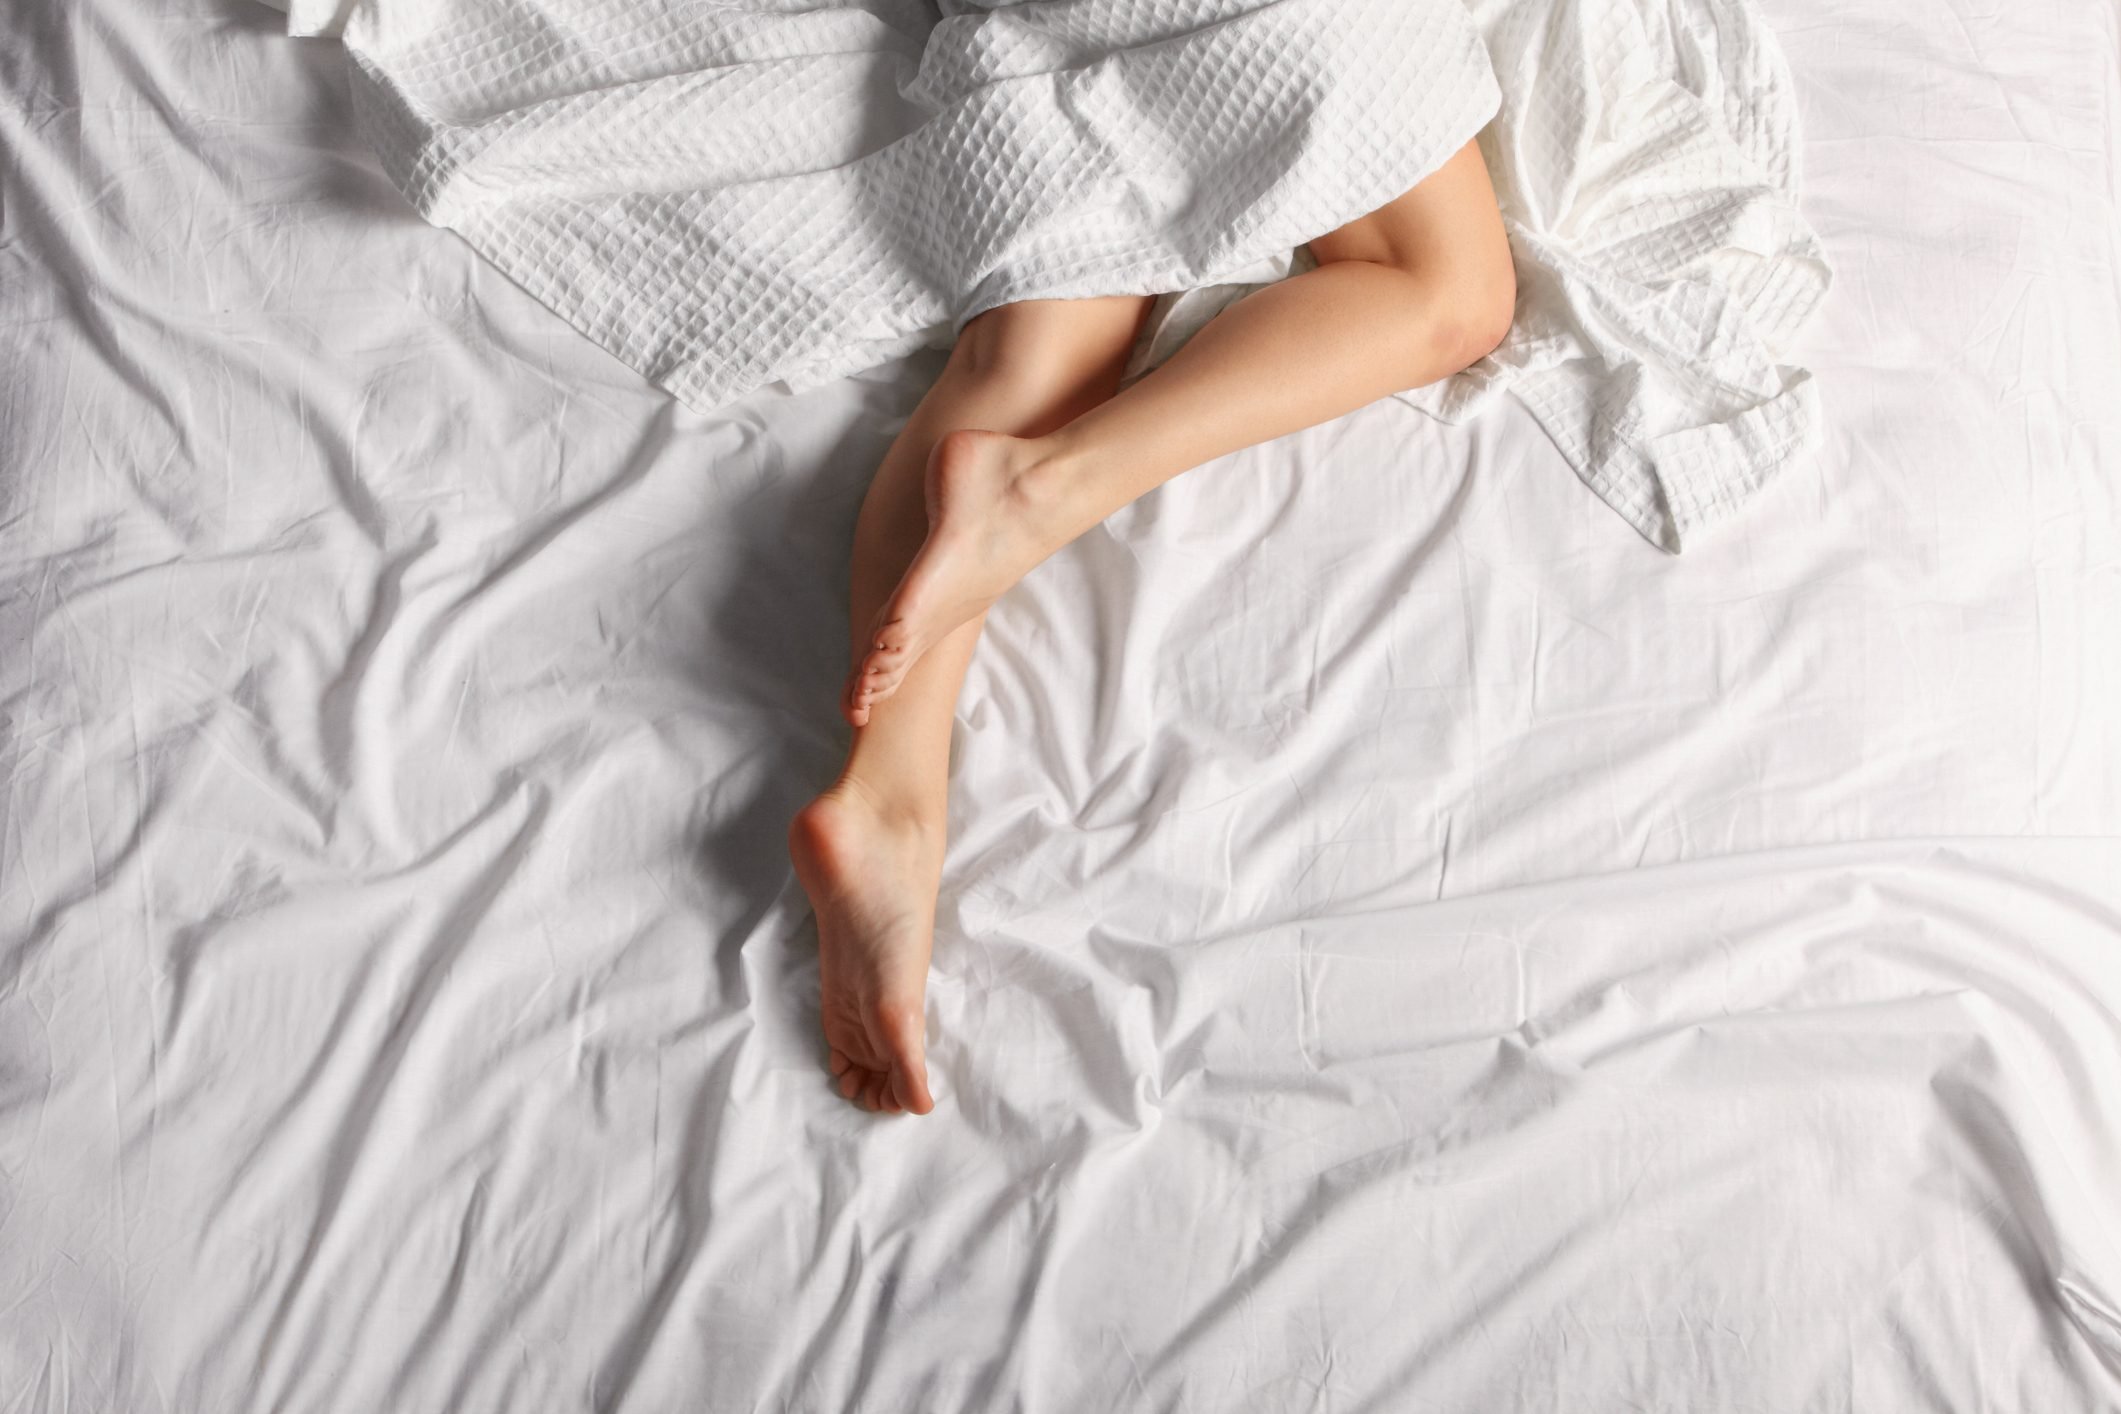 ADVICE: Is it better to go commando when you sleep?